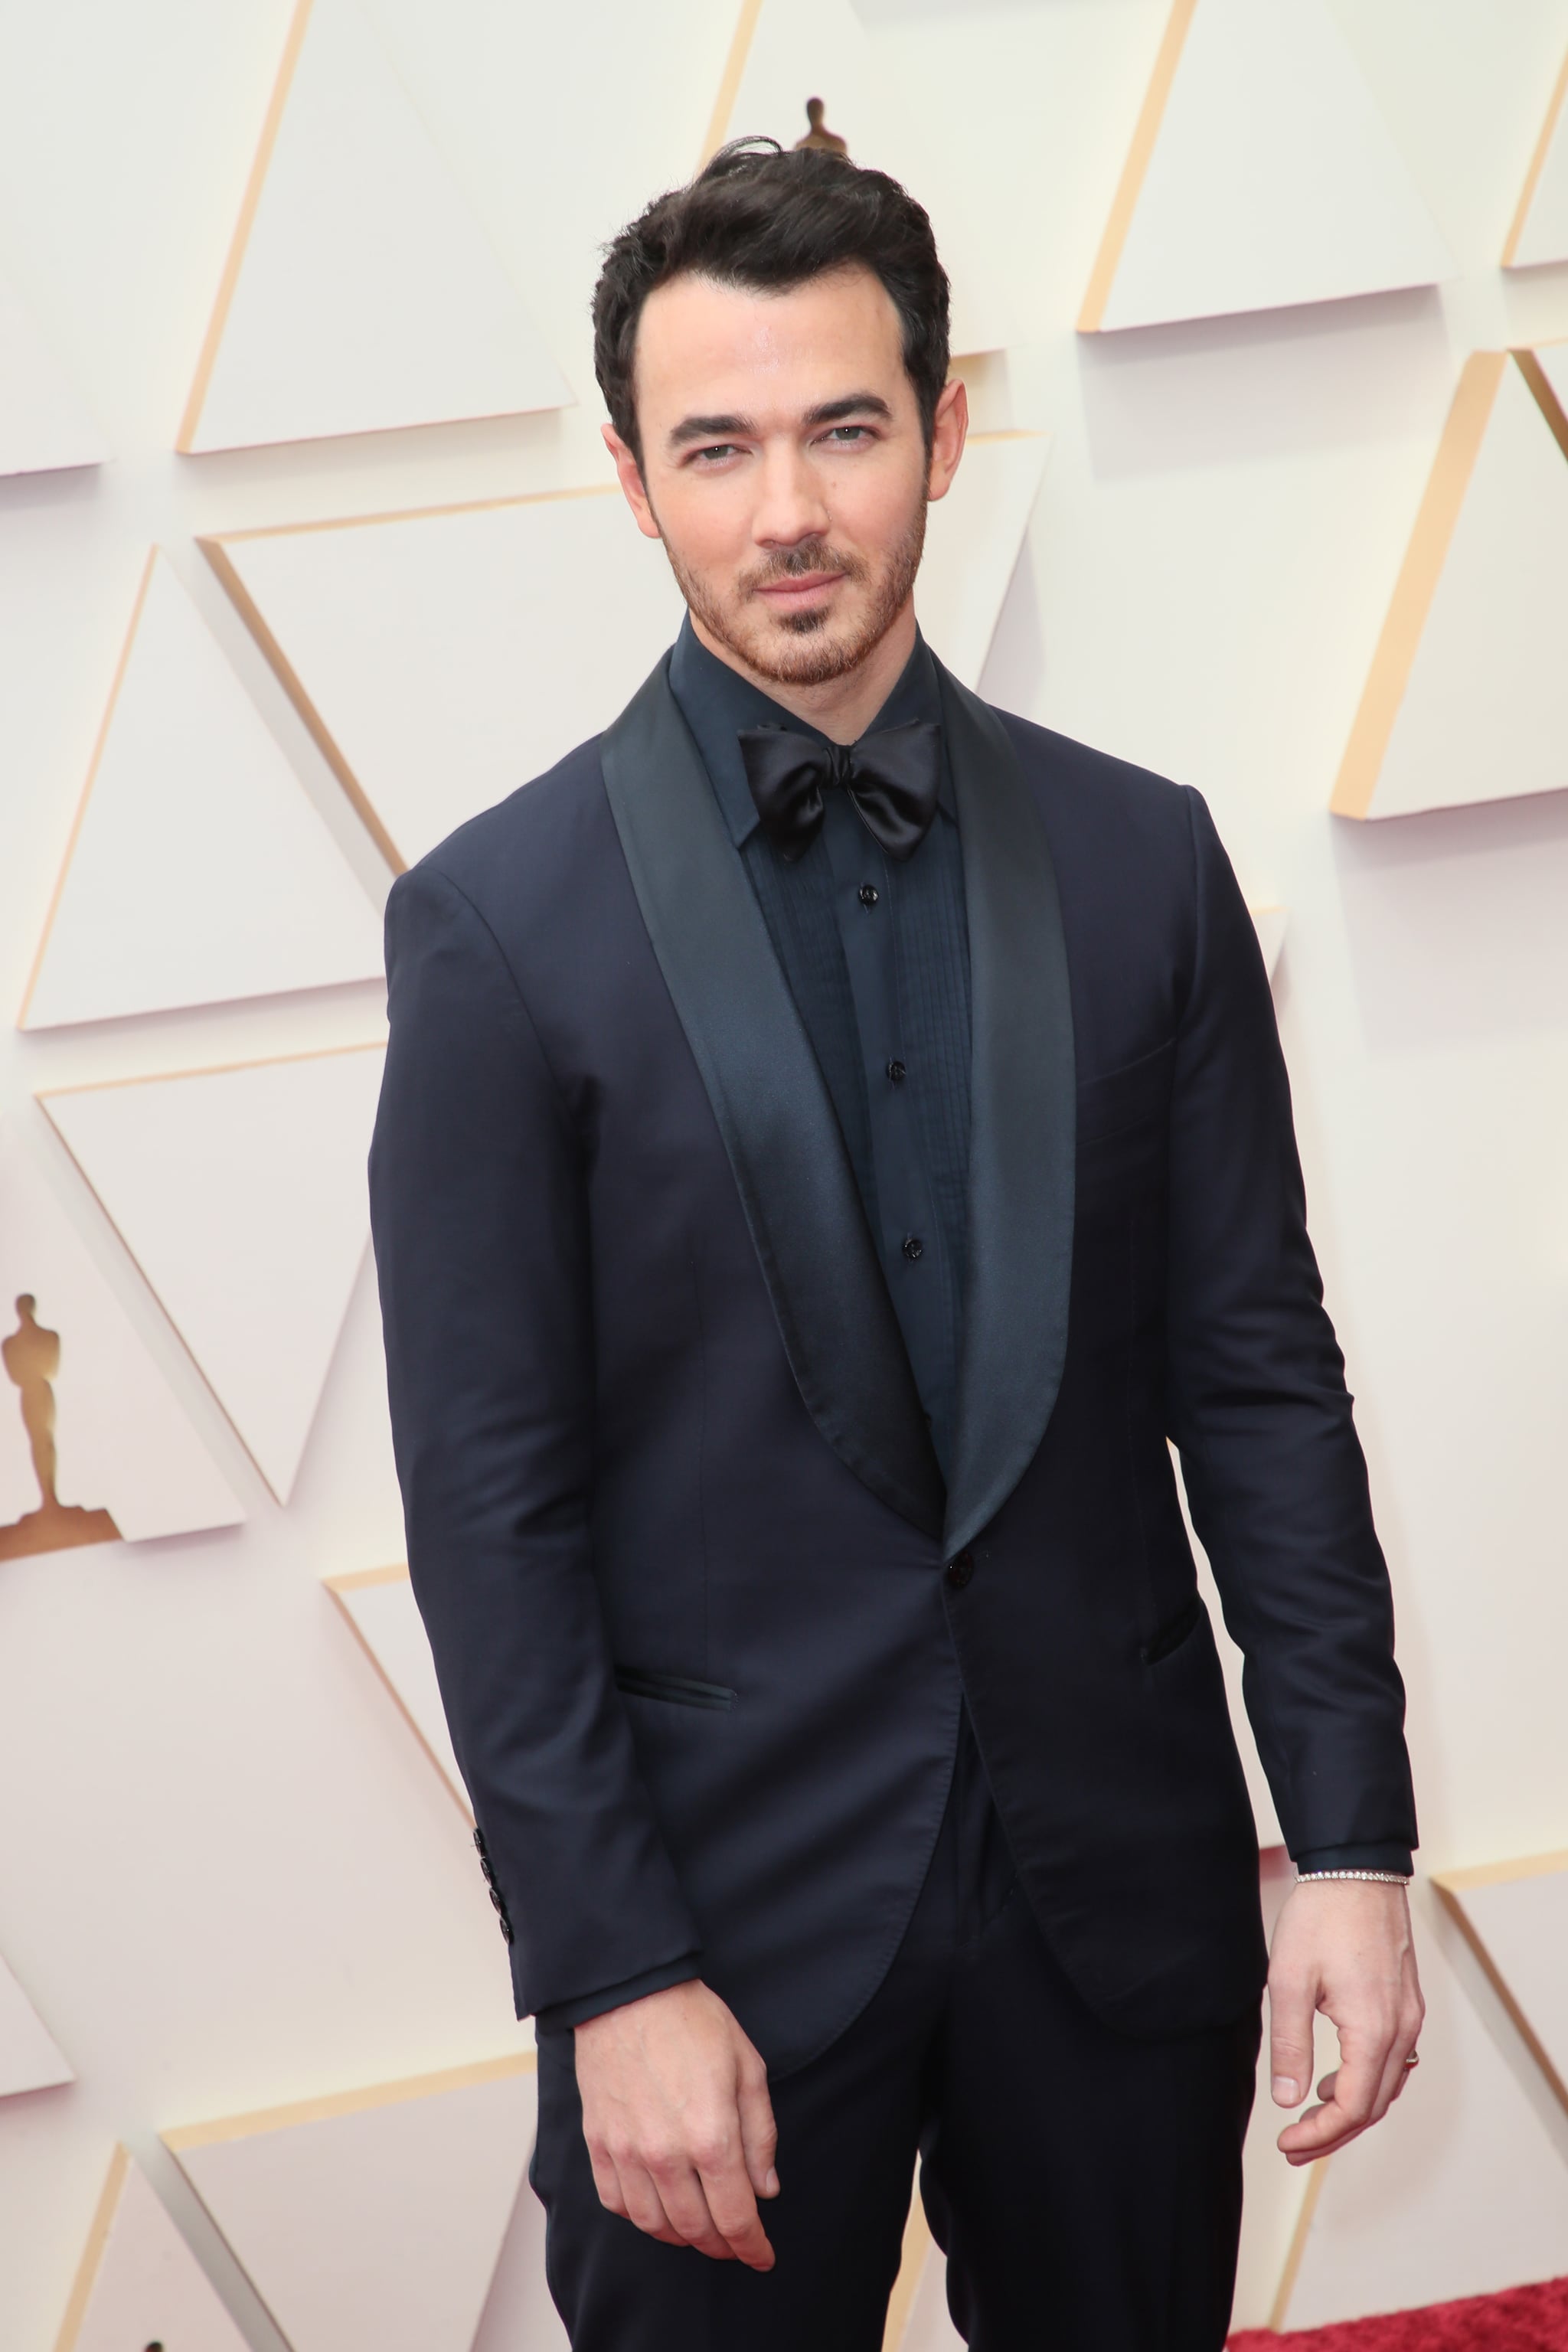 HOLLYWOOD, CALIFORNIA - MARCH 27: Kevin Jonas attends the 94th Annual Academy Awards at Hollywood and Highland on March 27, 2022 in Hollywood, California. (Photo by David Livingston/Getty Images)